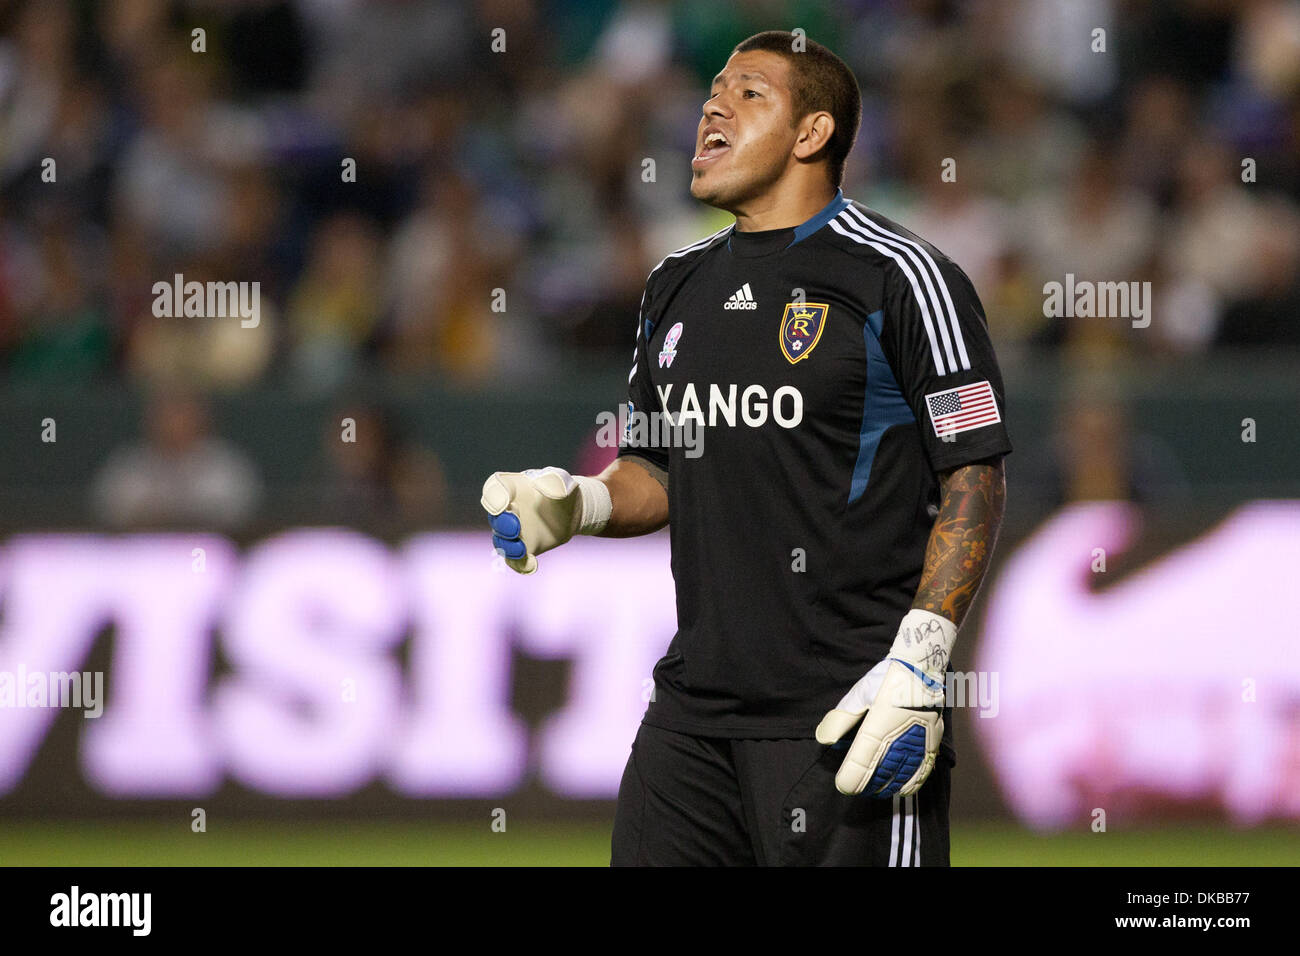 Oct. 1, 2011 - Carson, California, U.S - Real Salt Lake goalkeeper Nick Rimando #18 during the Major League Soccer game between Real Salt Lake and the Los Angeles Galaxy at the Home Depot Center. The Galaxy went on to defeat Real Salt Lake with a final score of 2-1. (Credit Image: © Brandon Parry/Southcreek/ZUMAPRESS.com) Stock Photo